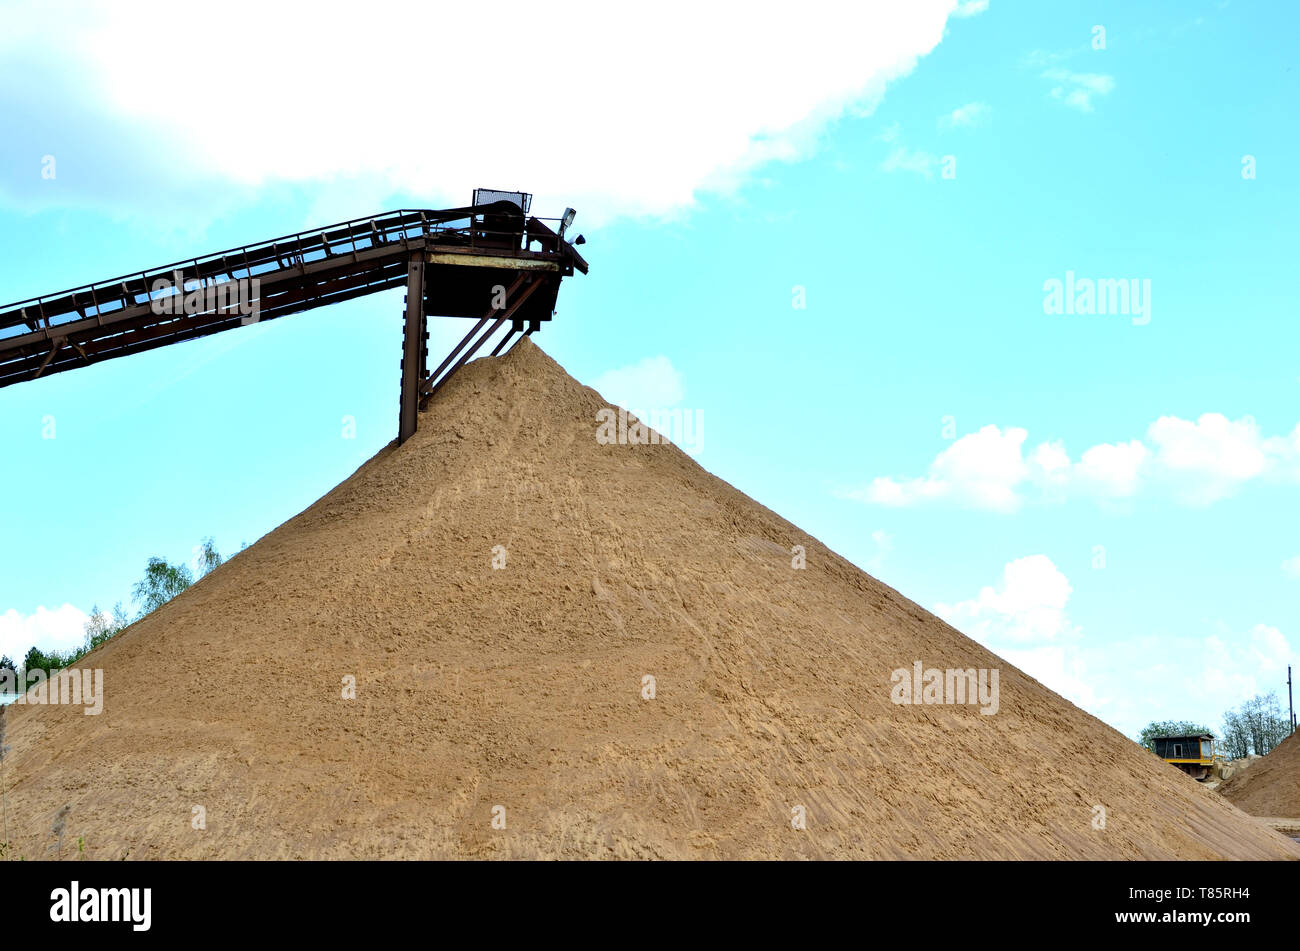 Sand Making Plant in mining quarry. Crushing factory, machines and equipment for crushing, grinding stone, sorting sand and bulk materials. Stock Photo